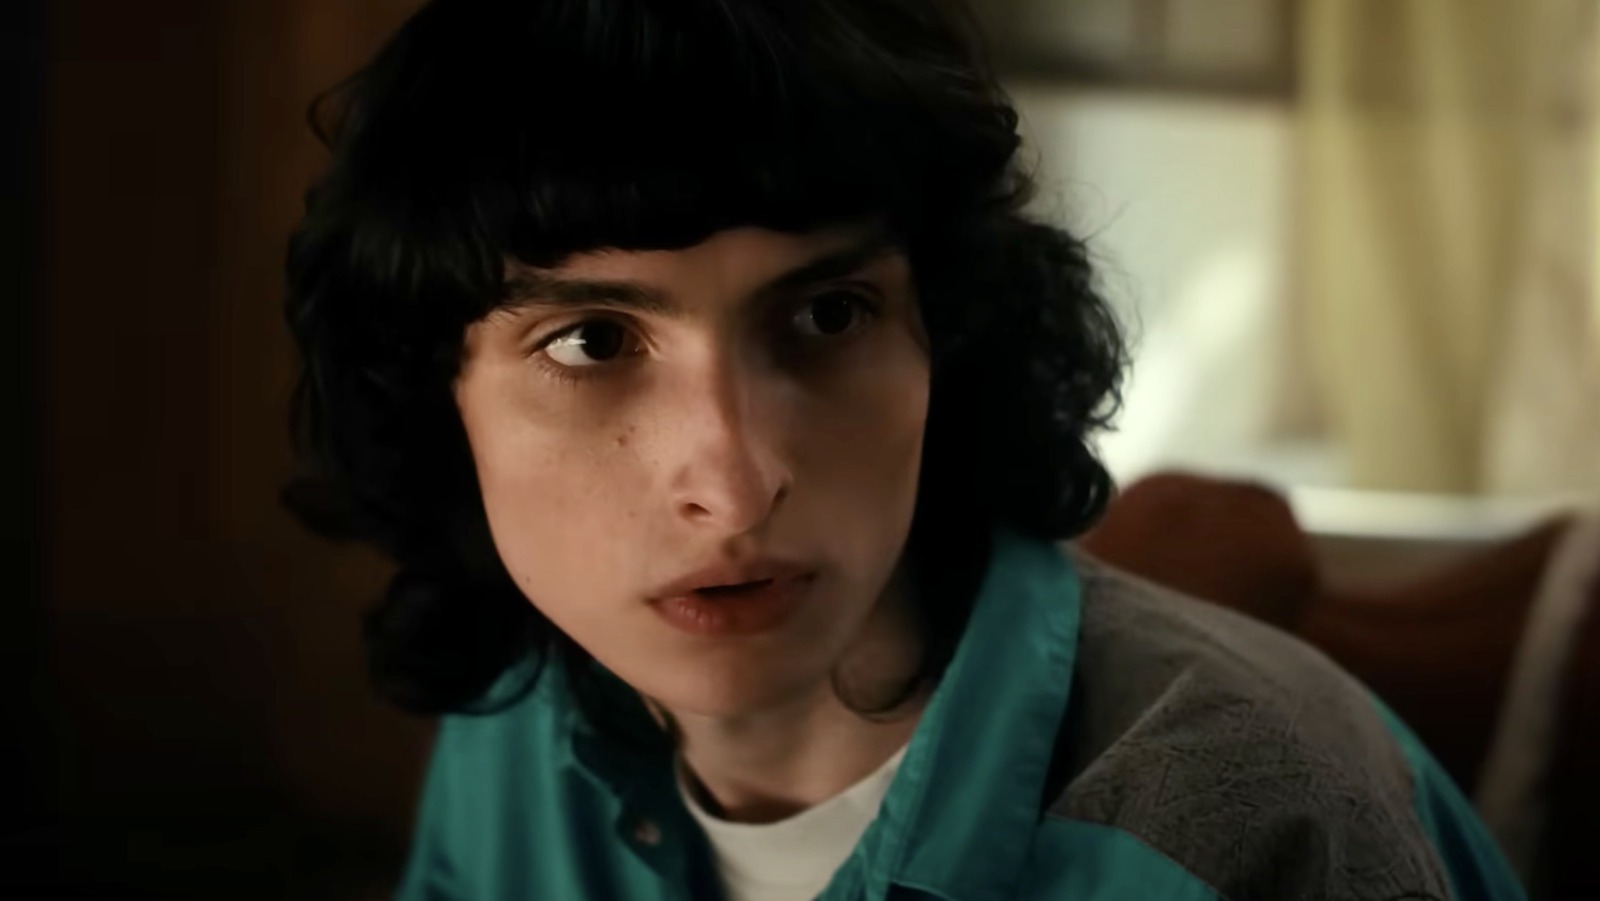 Finn Wolfhard thinks Stranger Things ending with season 5 is the right choice